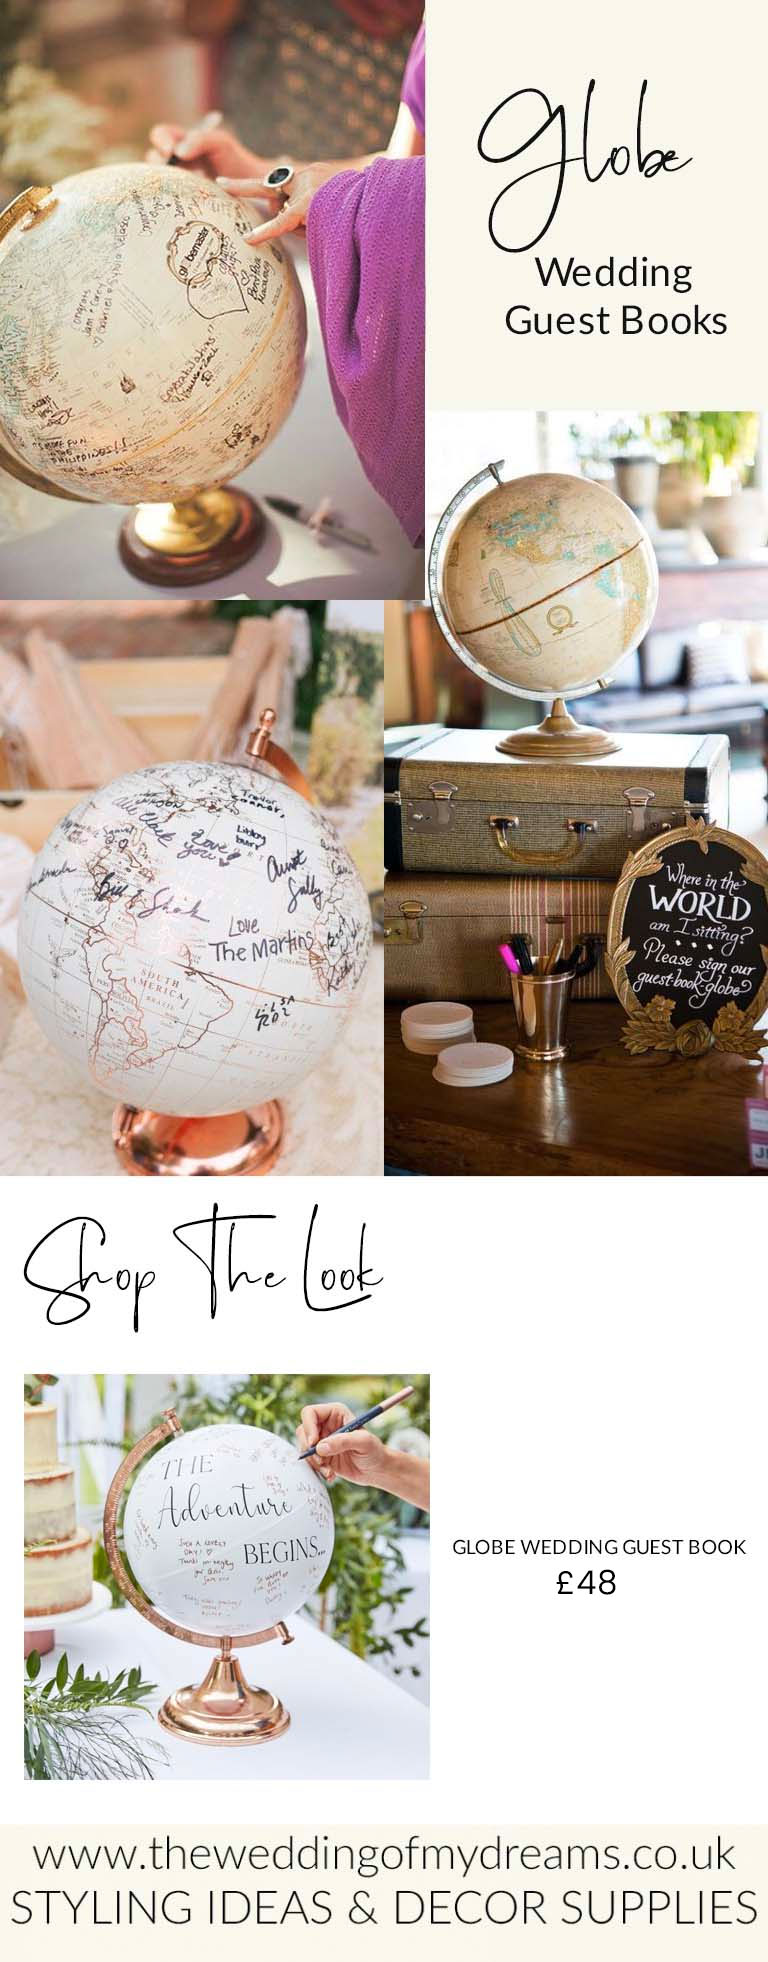 GLOBE WEDDING GUEST BOOKS FOR SALE